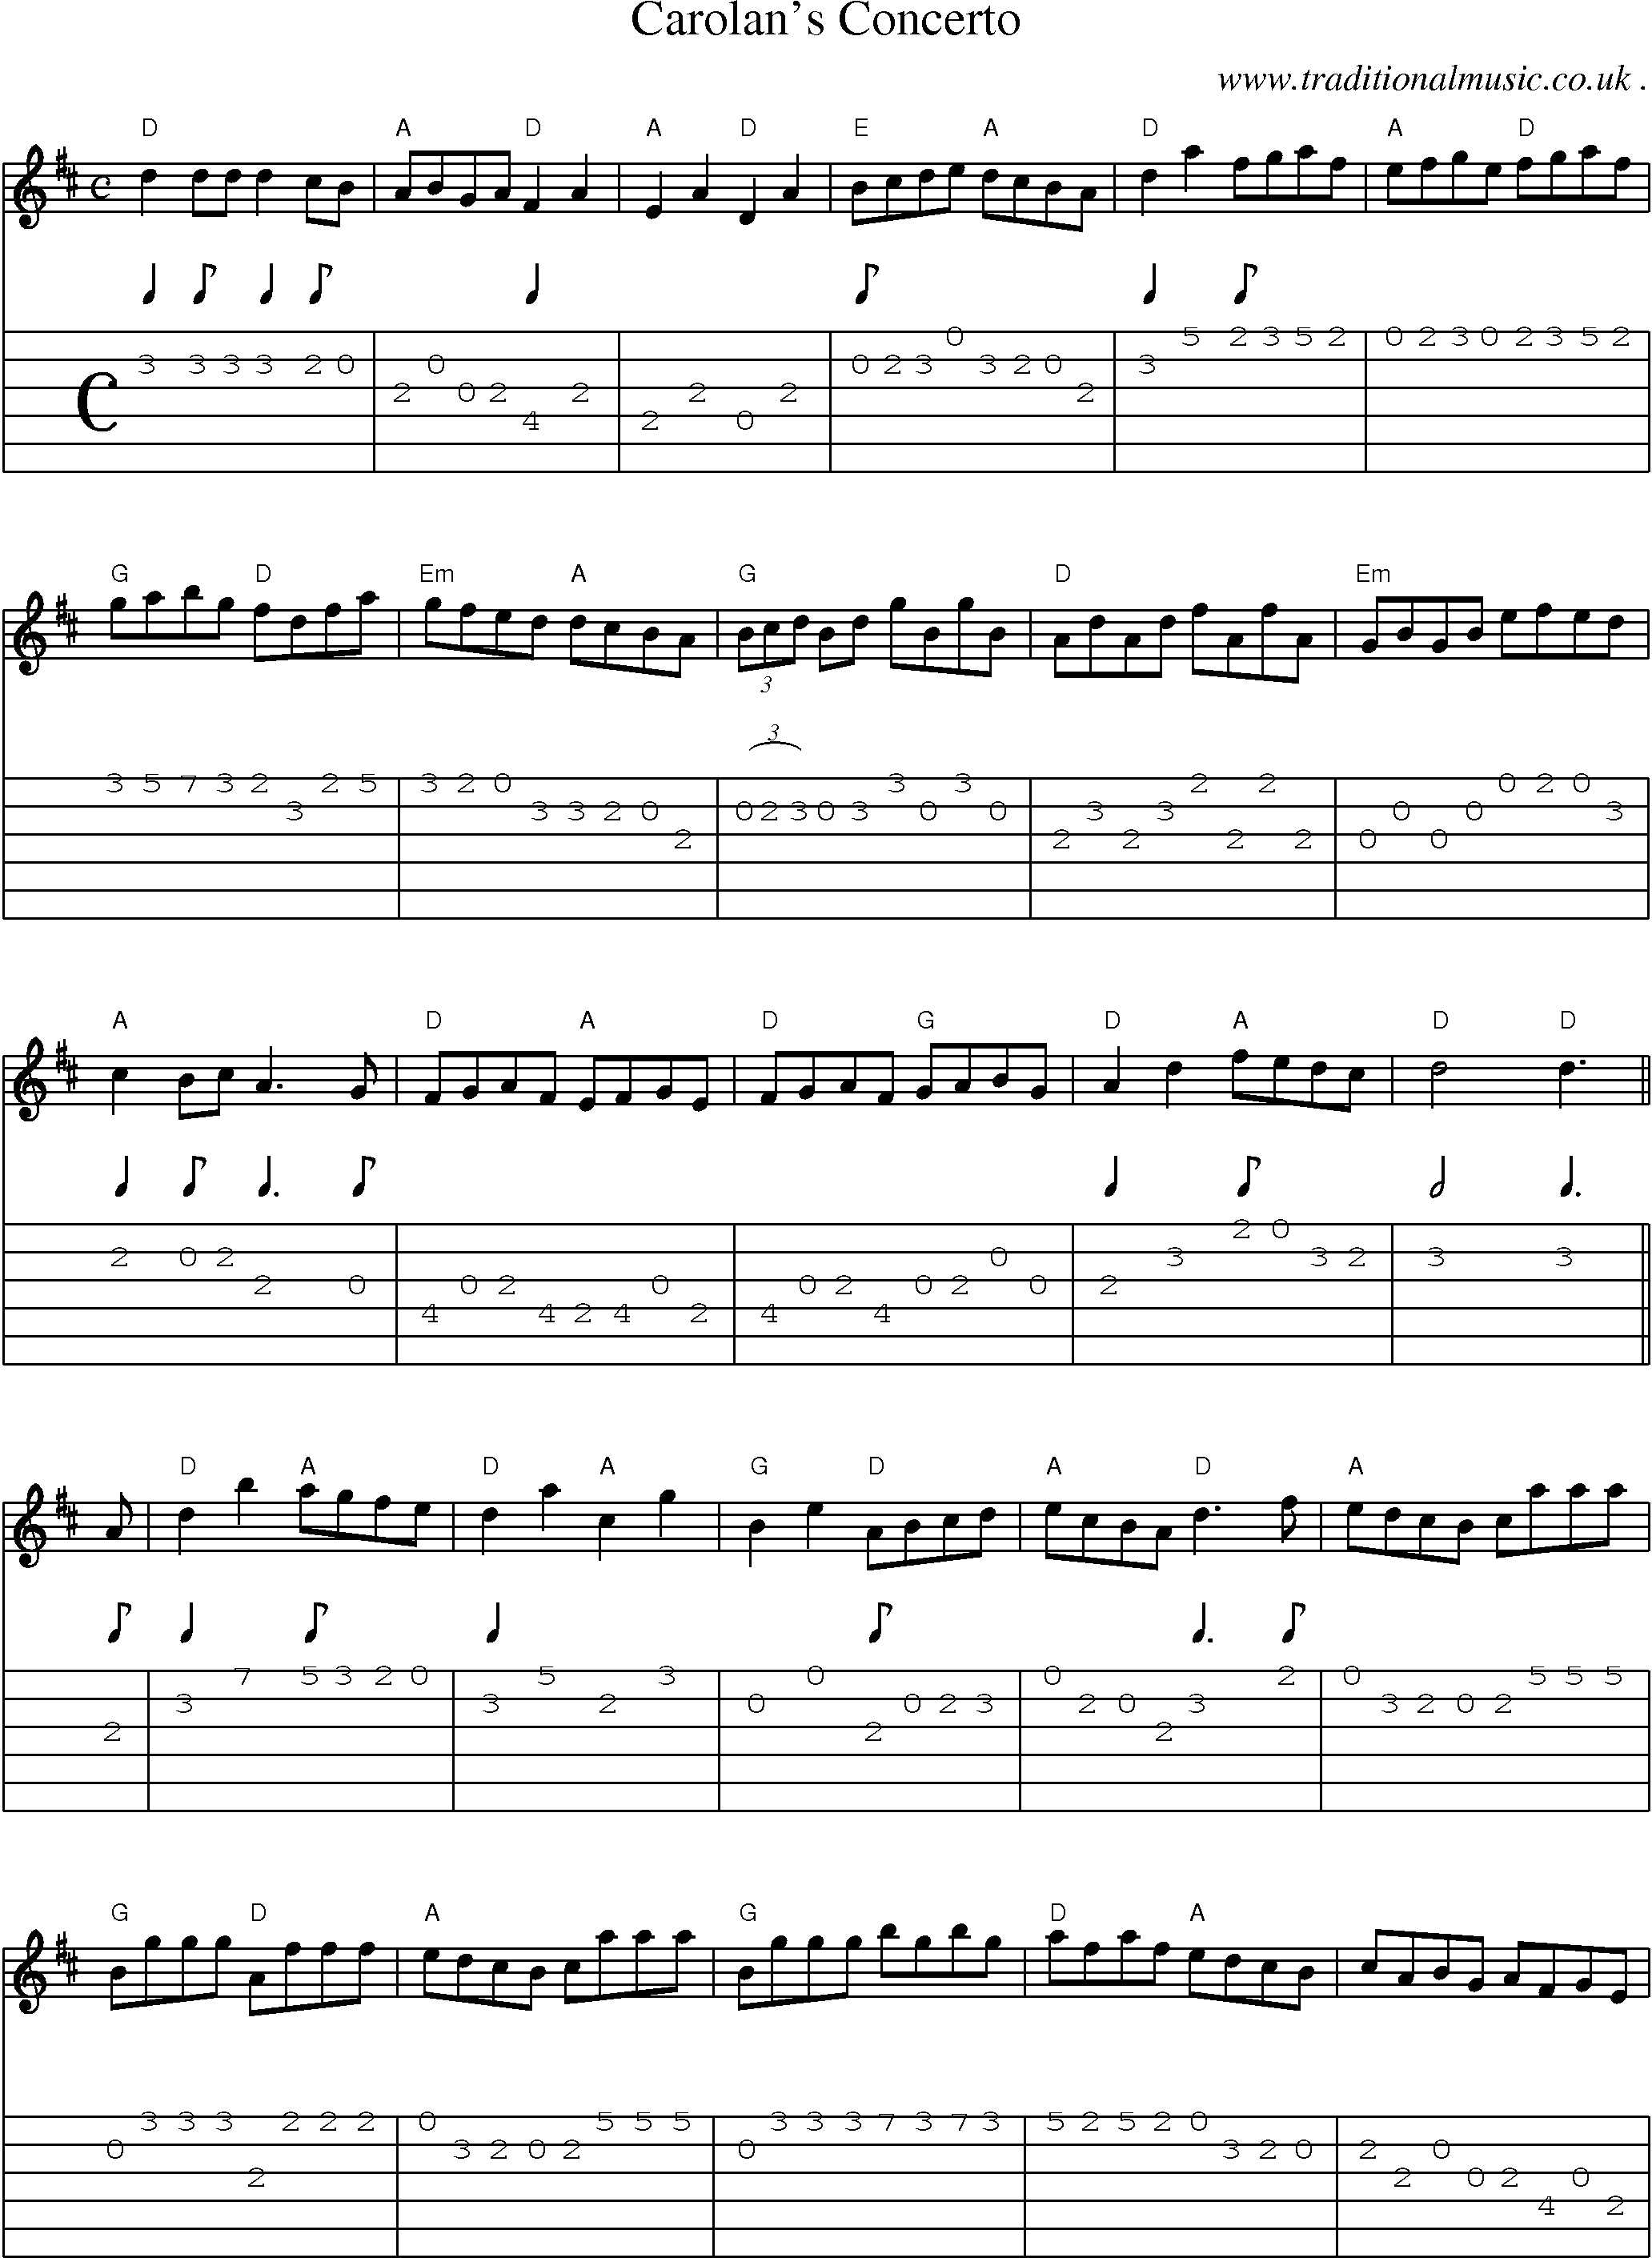 Music Score and Guitar Tabs for Carolans Concerto